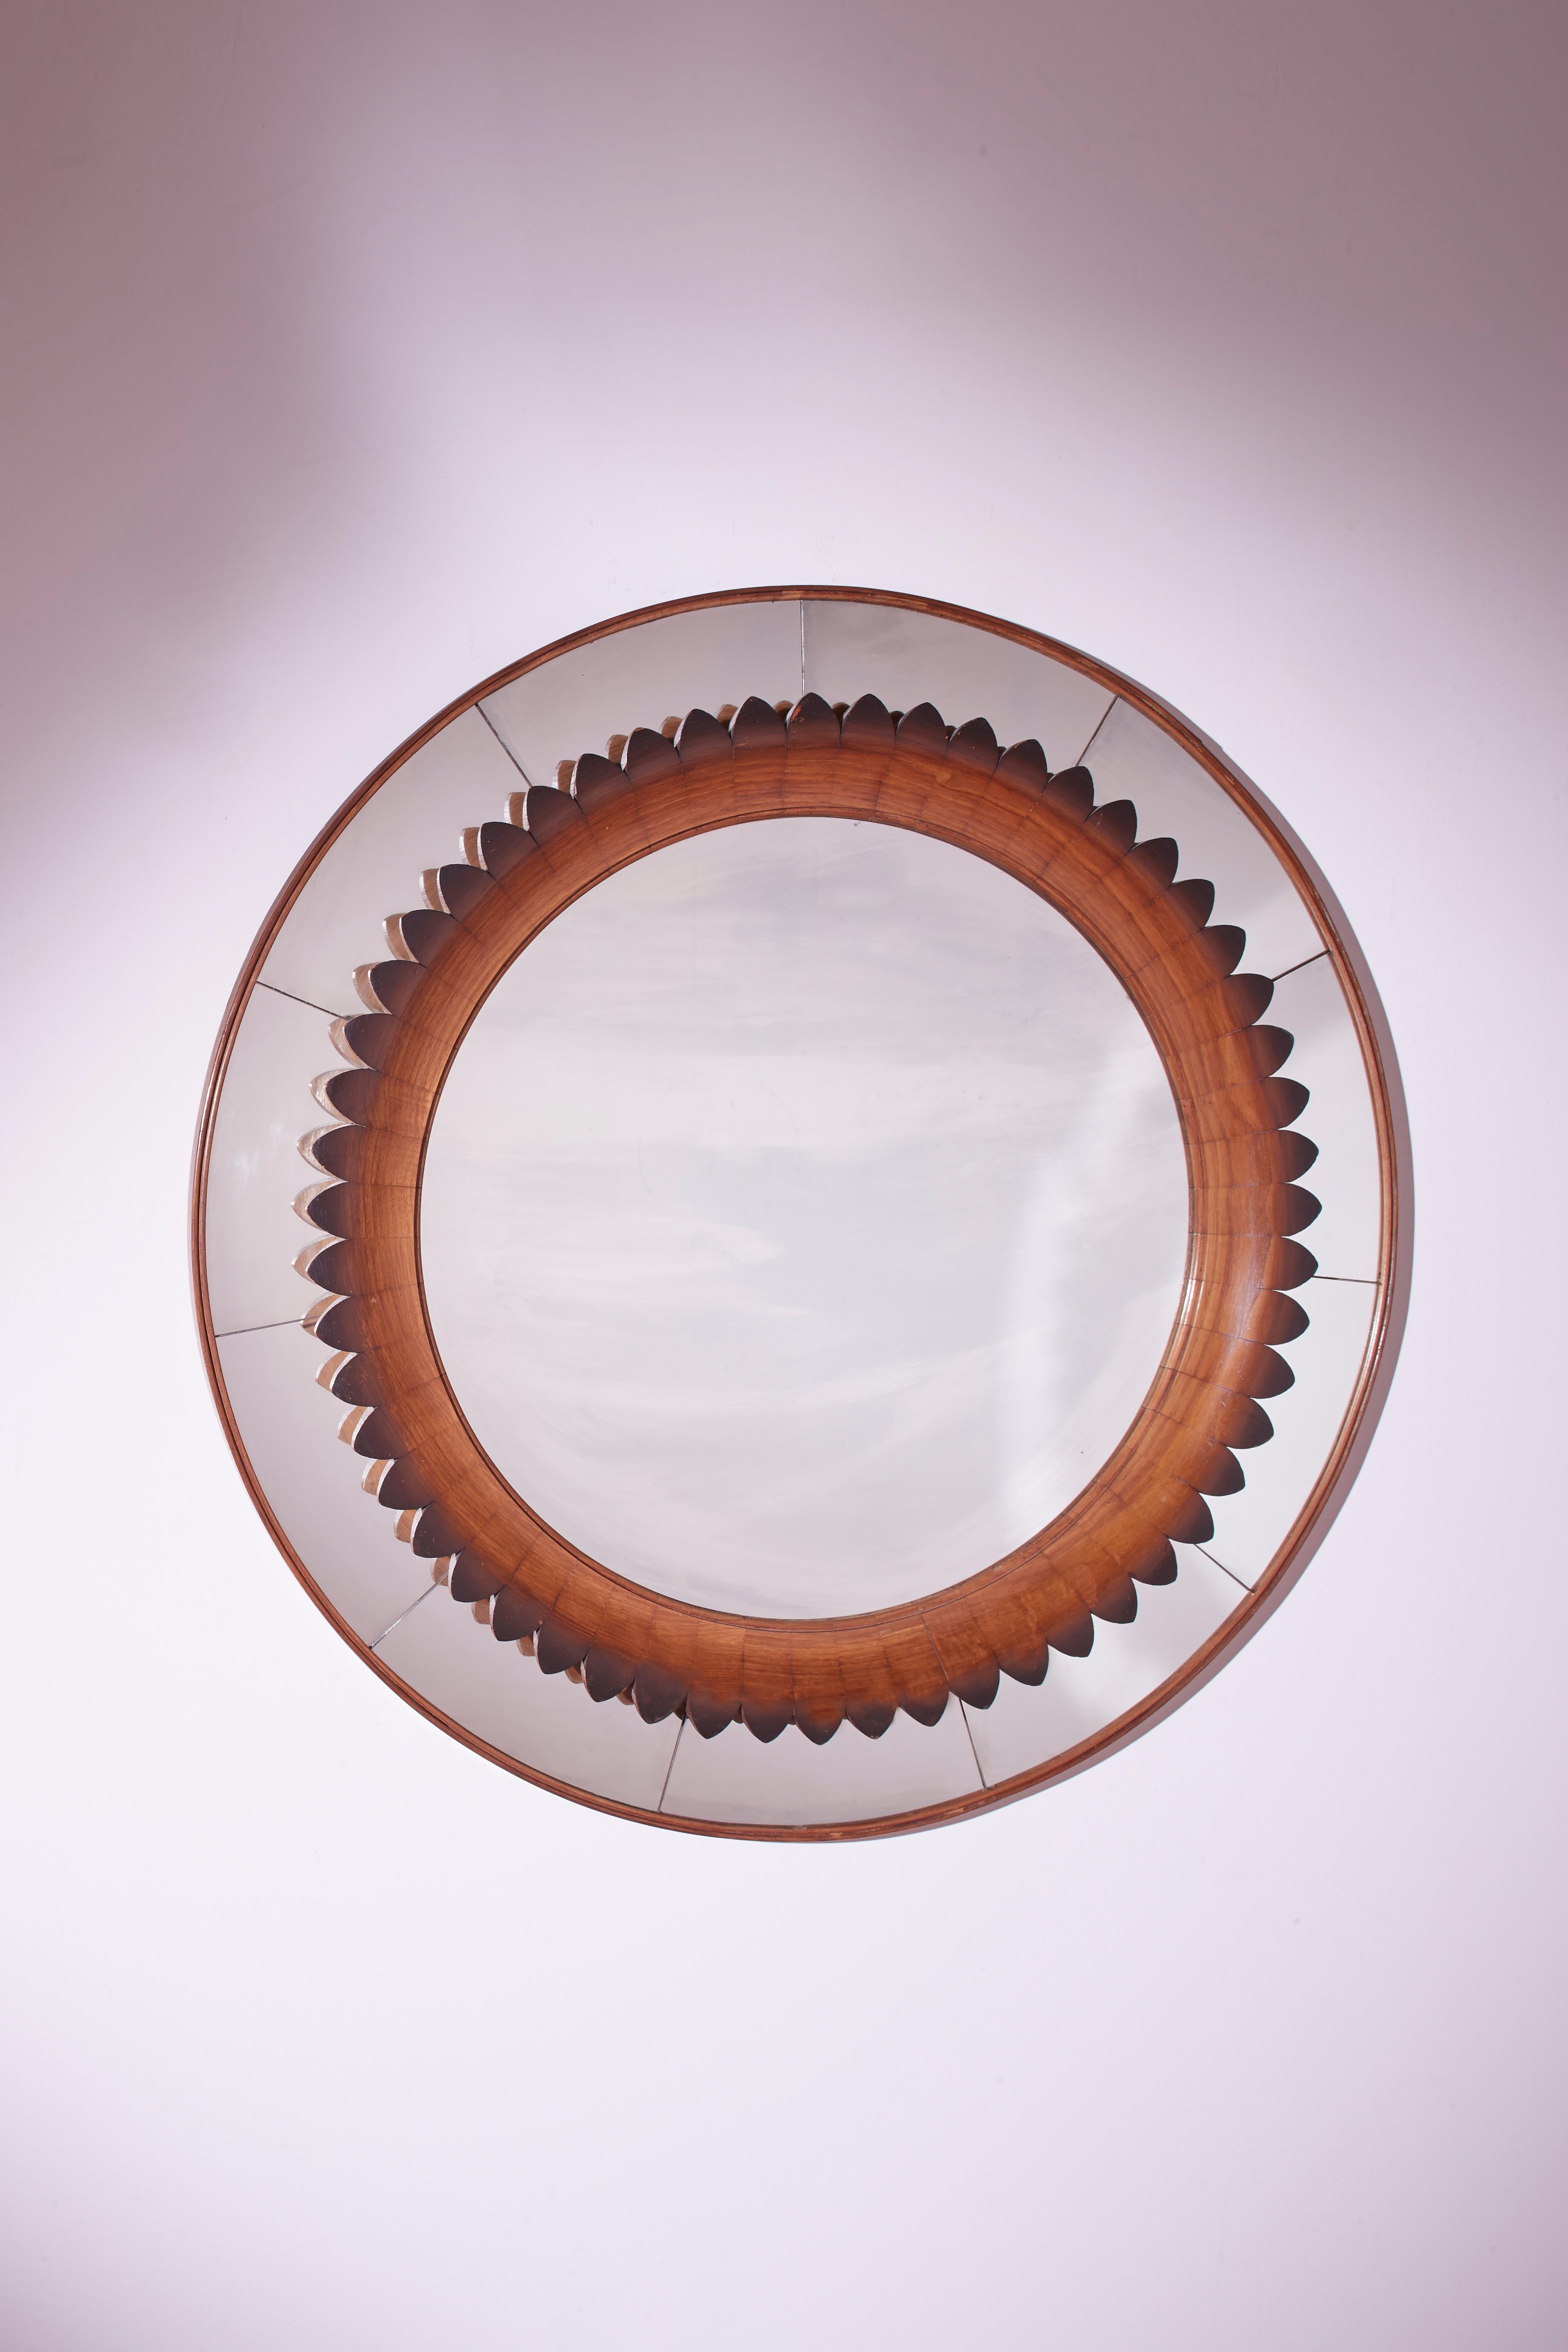 A beautiful round mirror framed in walnut wood represents the Italian craftsmanship mastery of the Fratelli Marelli from the 1950s. The modular wooden inserts that make up the frame evoke the image of flower petals or sun rays.

The mirror, always a